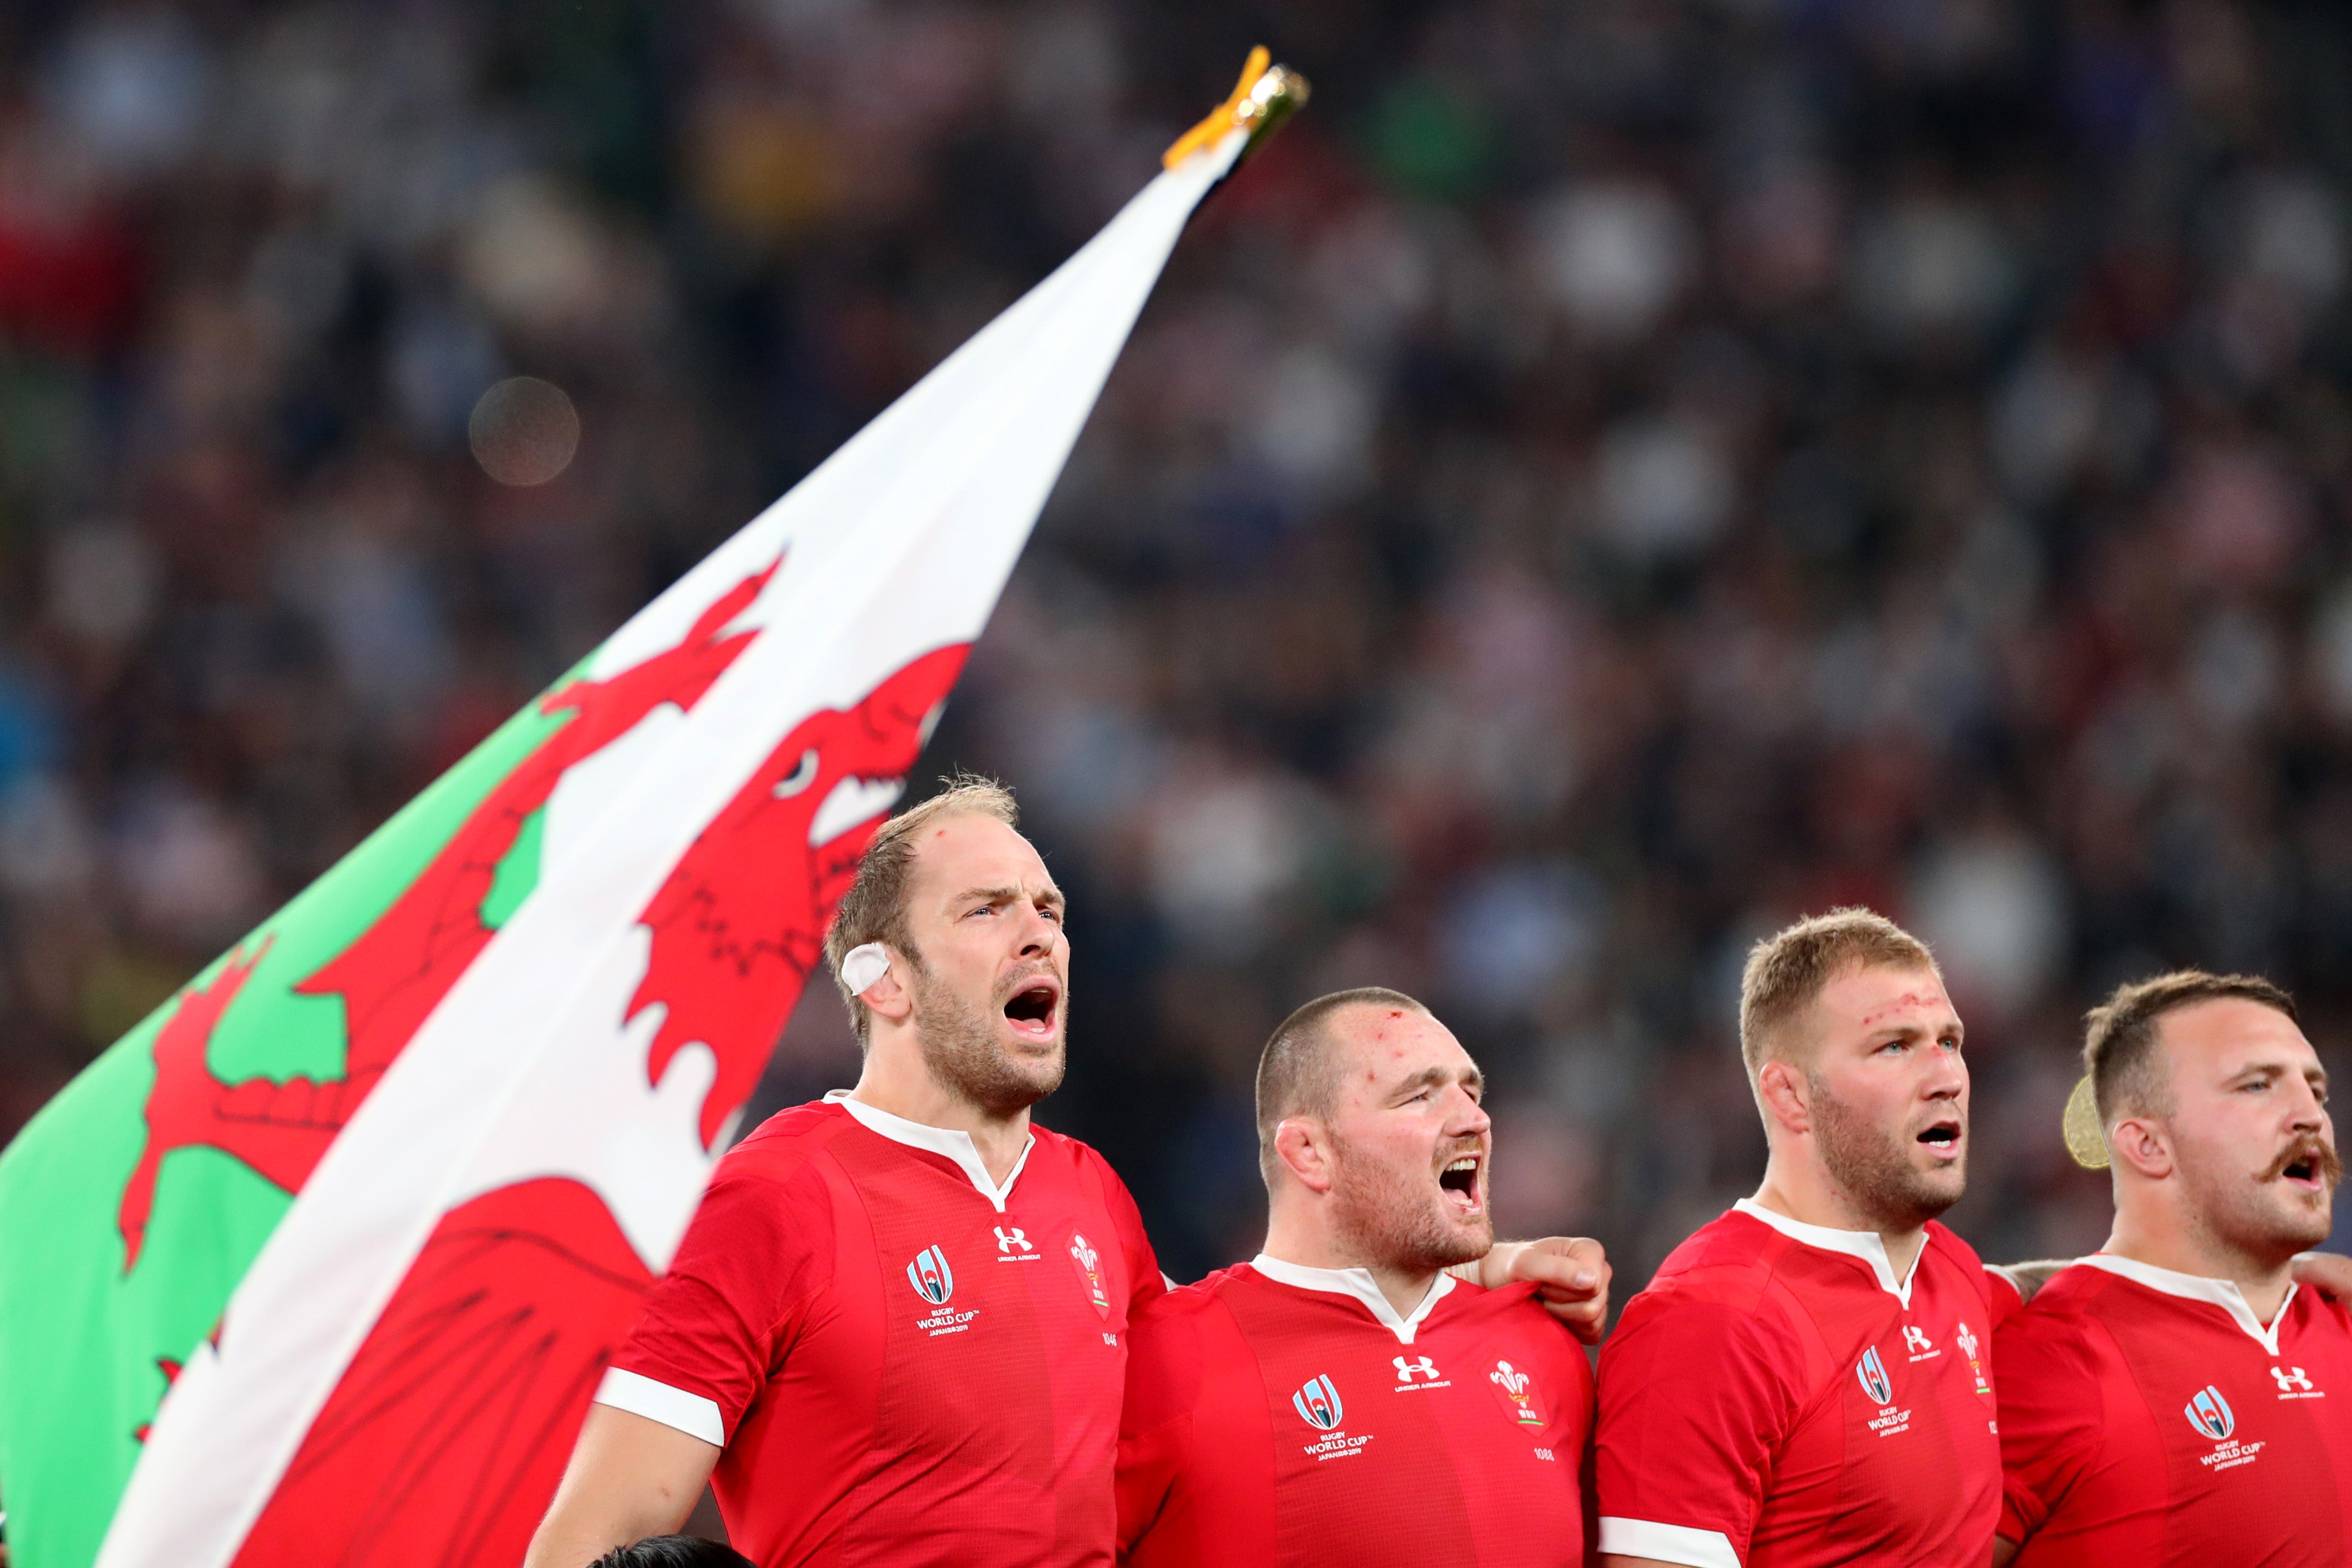 Wales last took on New Zealand at the 2019 Rugby World Cup